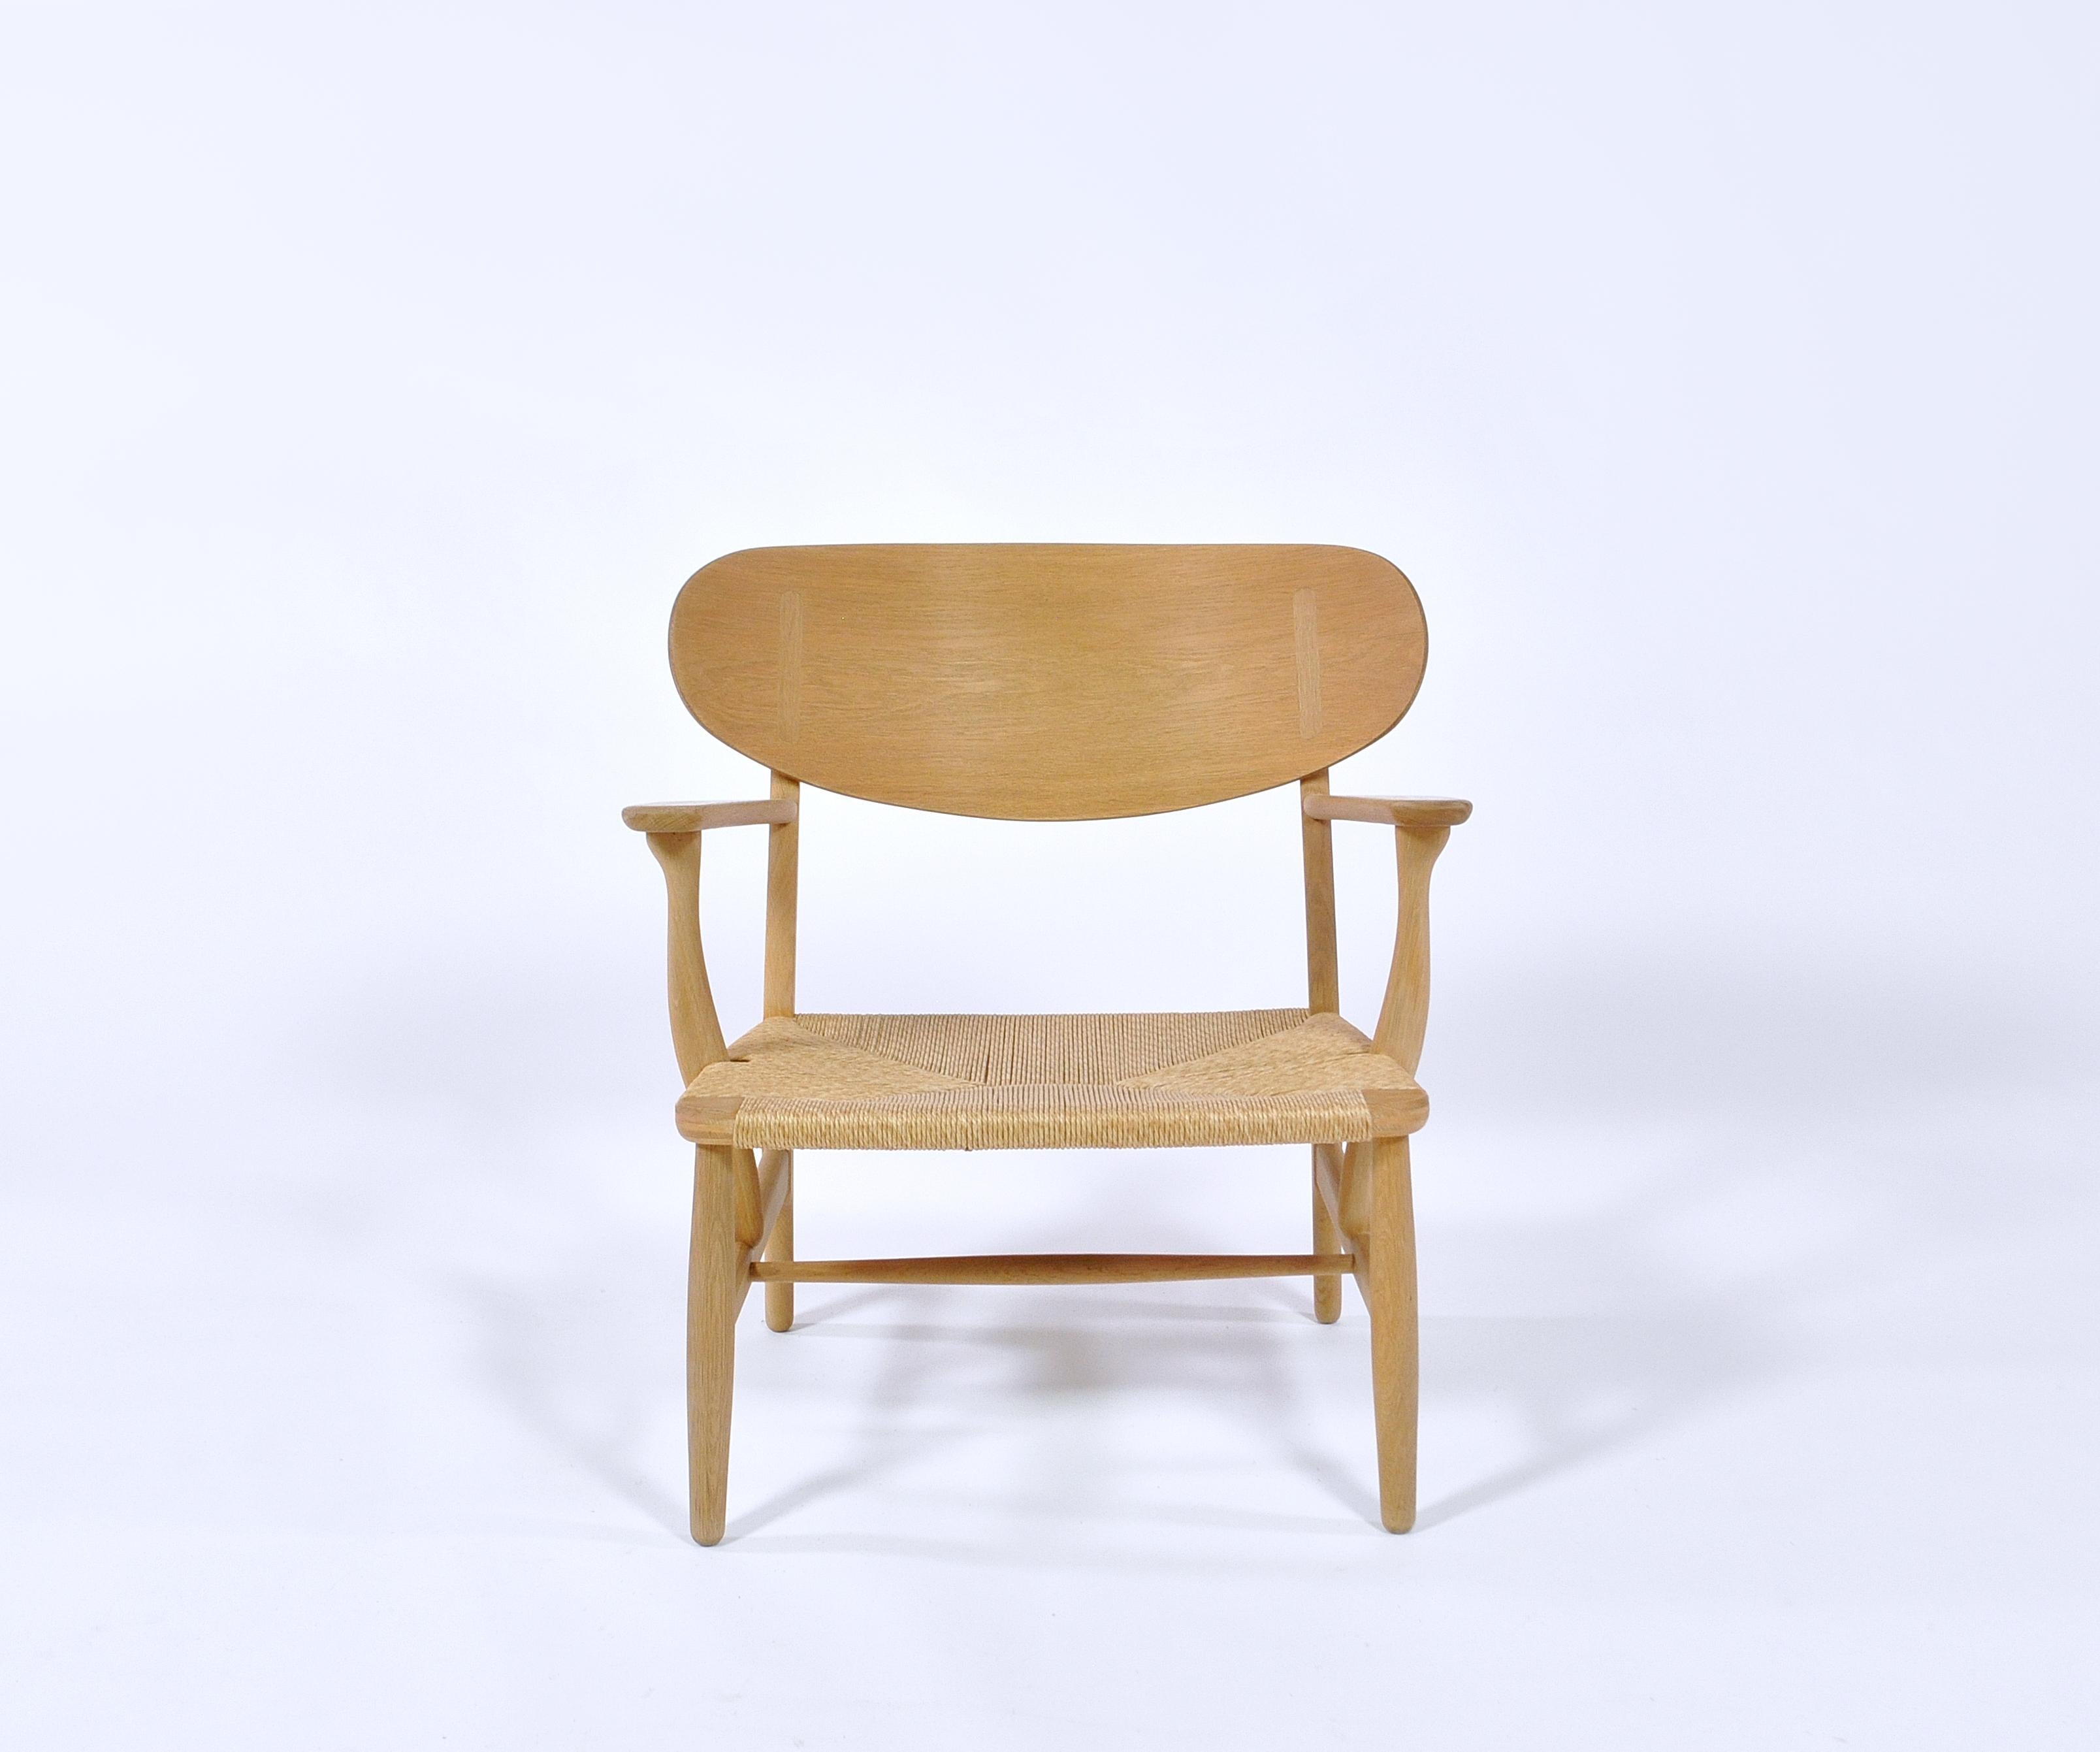 Hans J. Wegner´s iconic model CH-22 oak lounge chair for Carl Hansen & Son, Denmark. Designed in the early 1950s. Beautiful vintage production example with original label underneath the arm and in very good original condition. Beautiful wood grain.